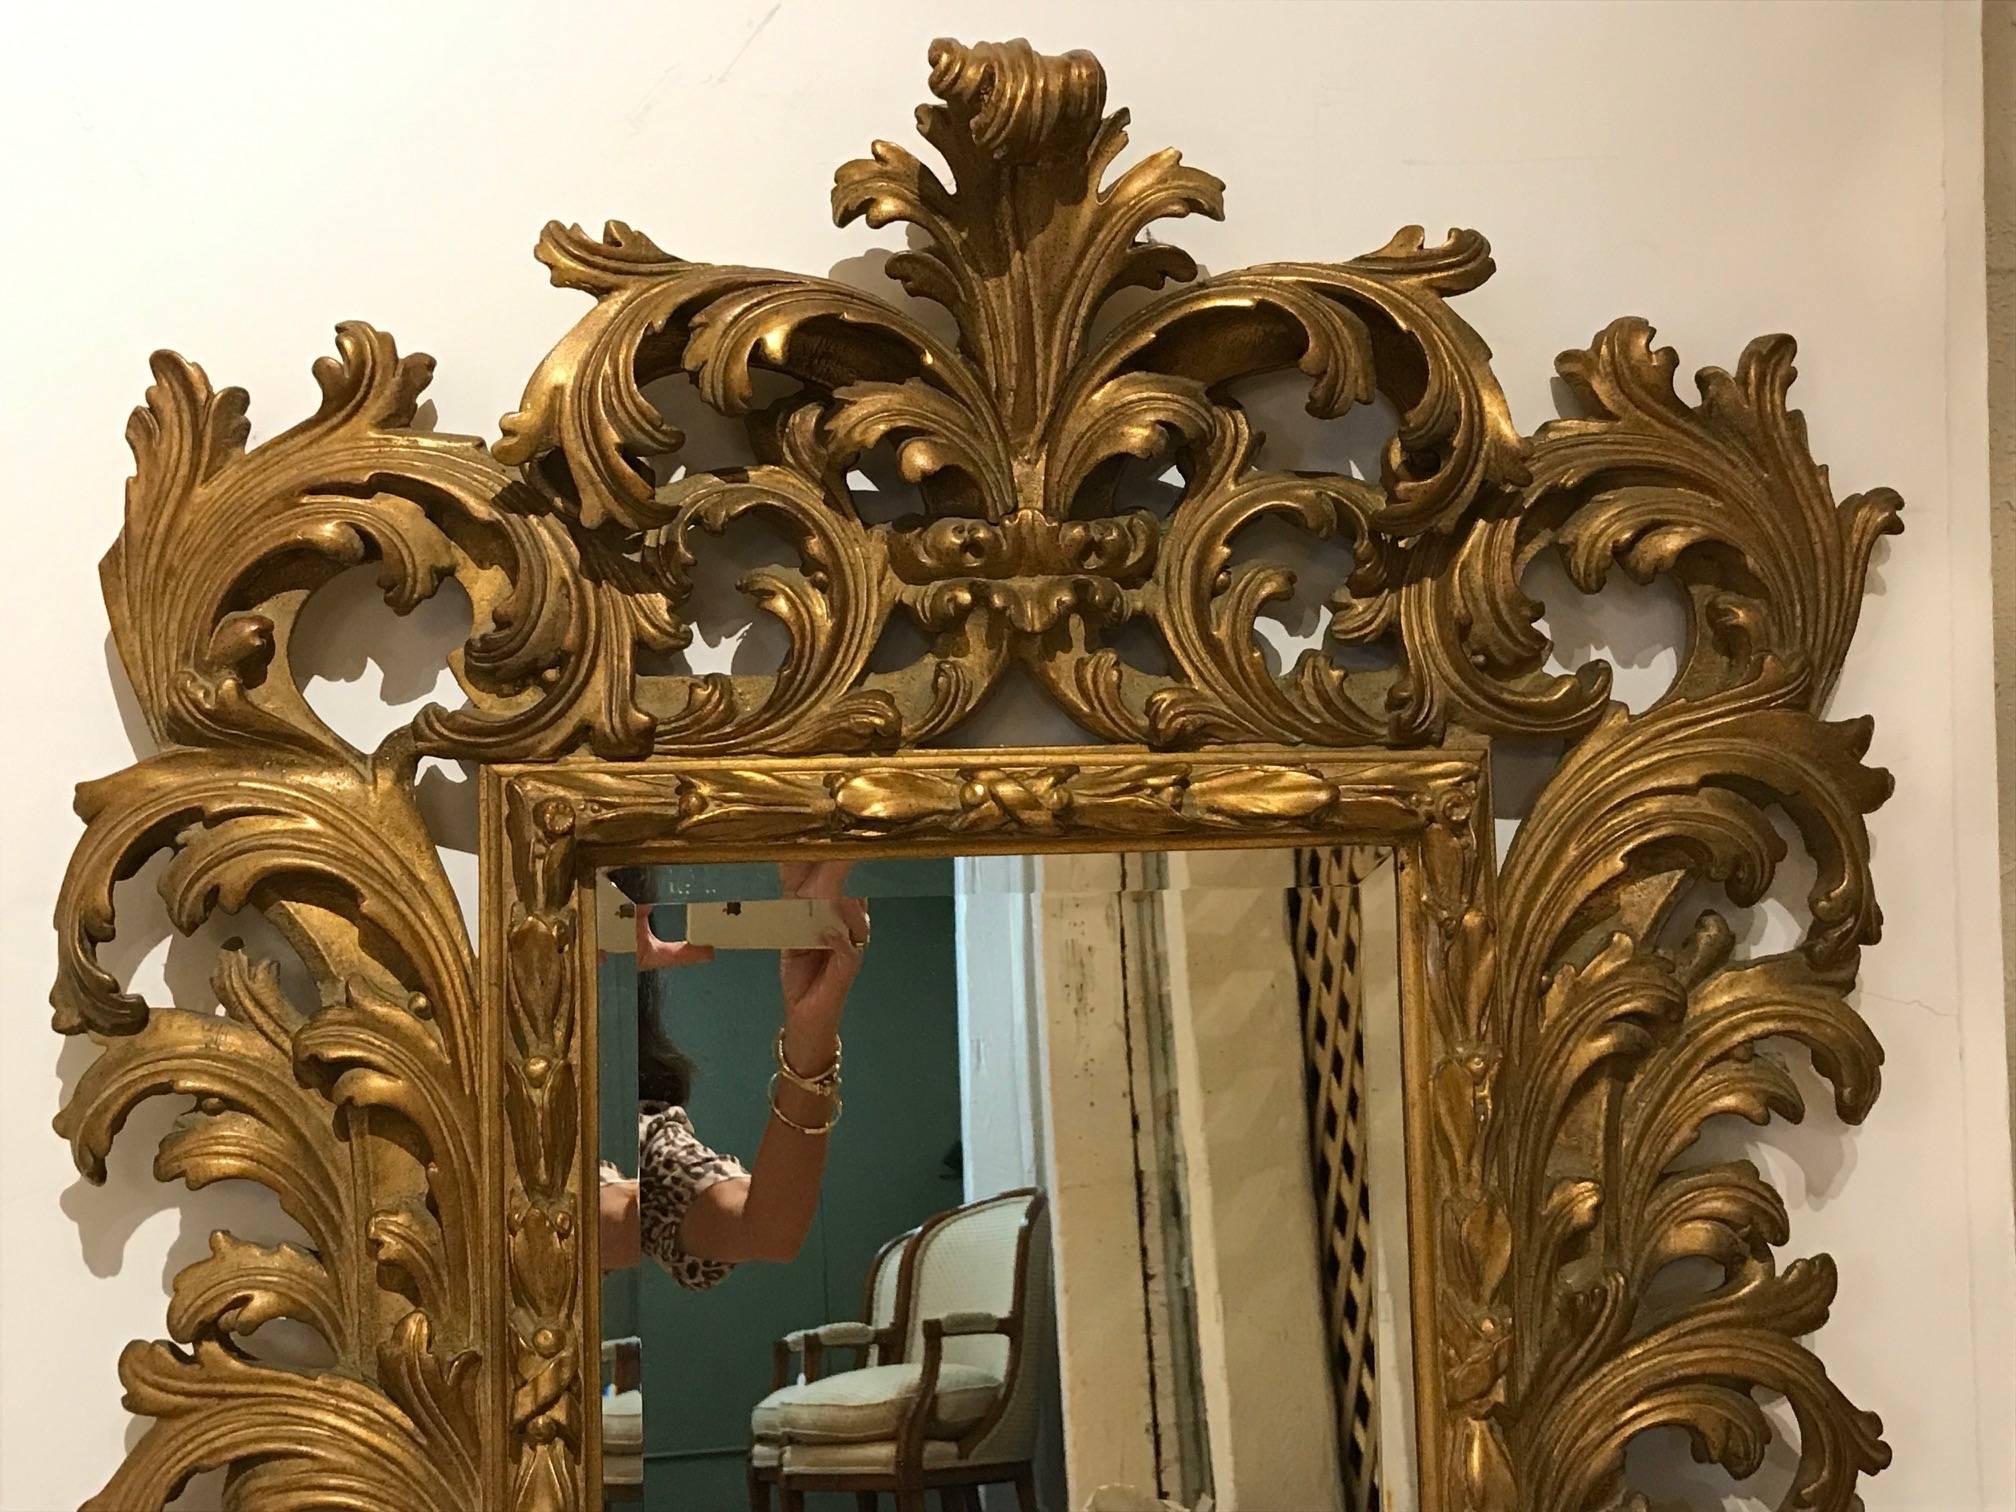 Gorgeous fancy carved Venetian style giltwood mirror by Carvers Guild.
   
     